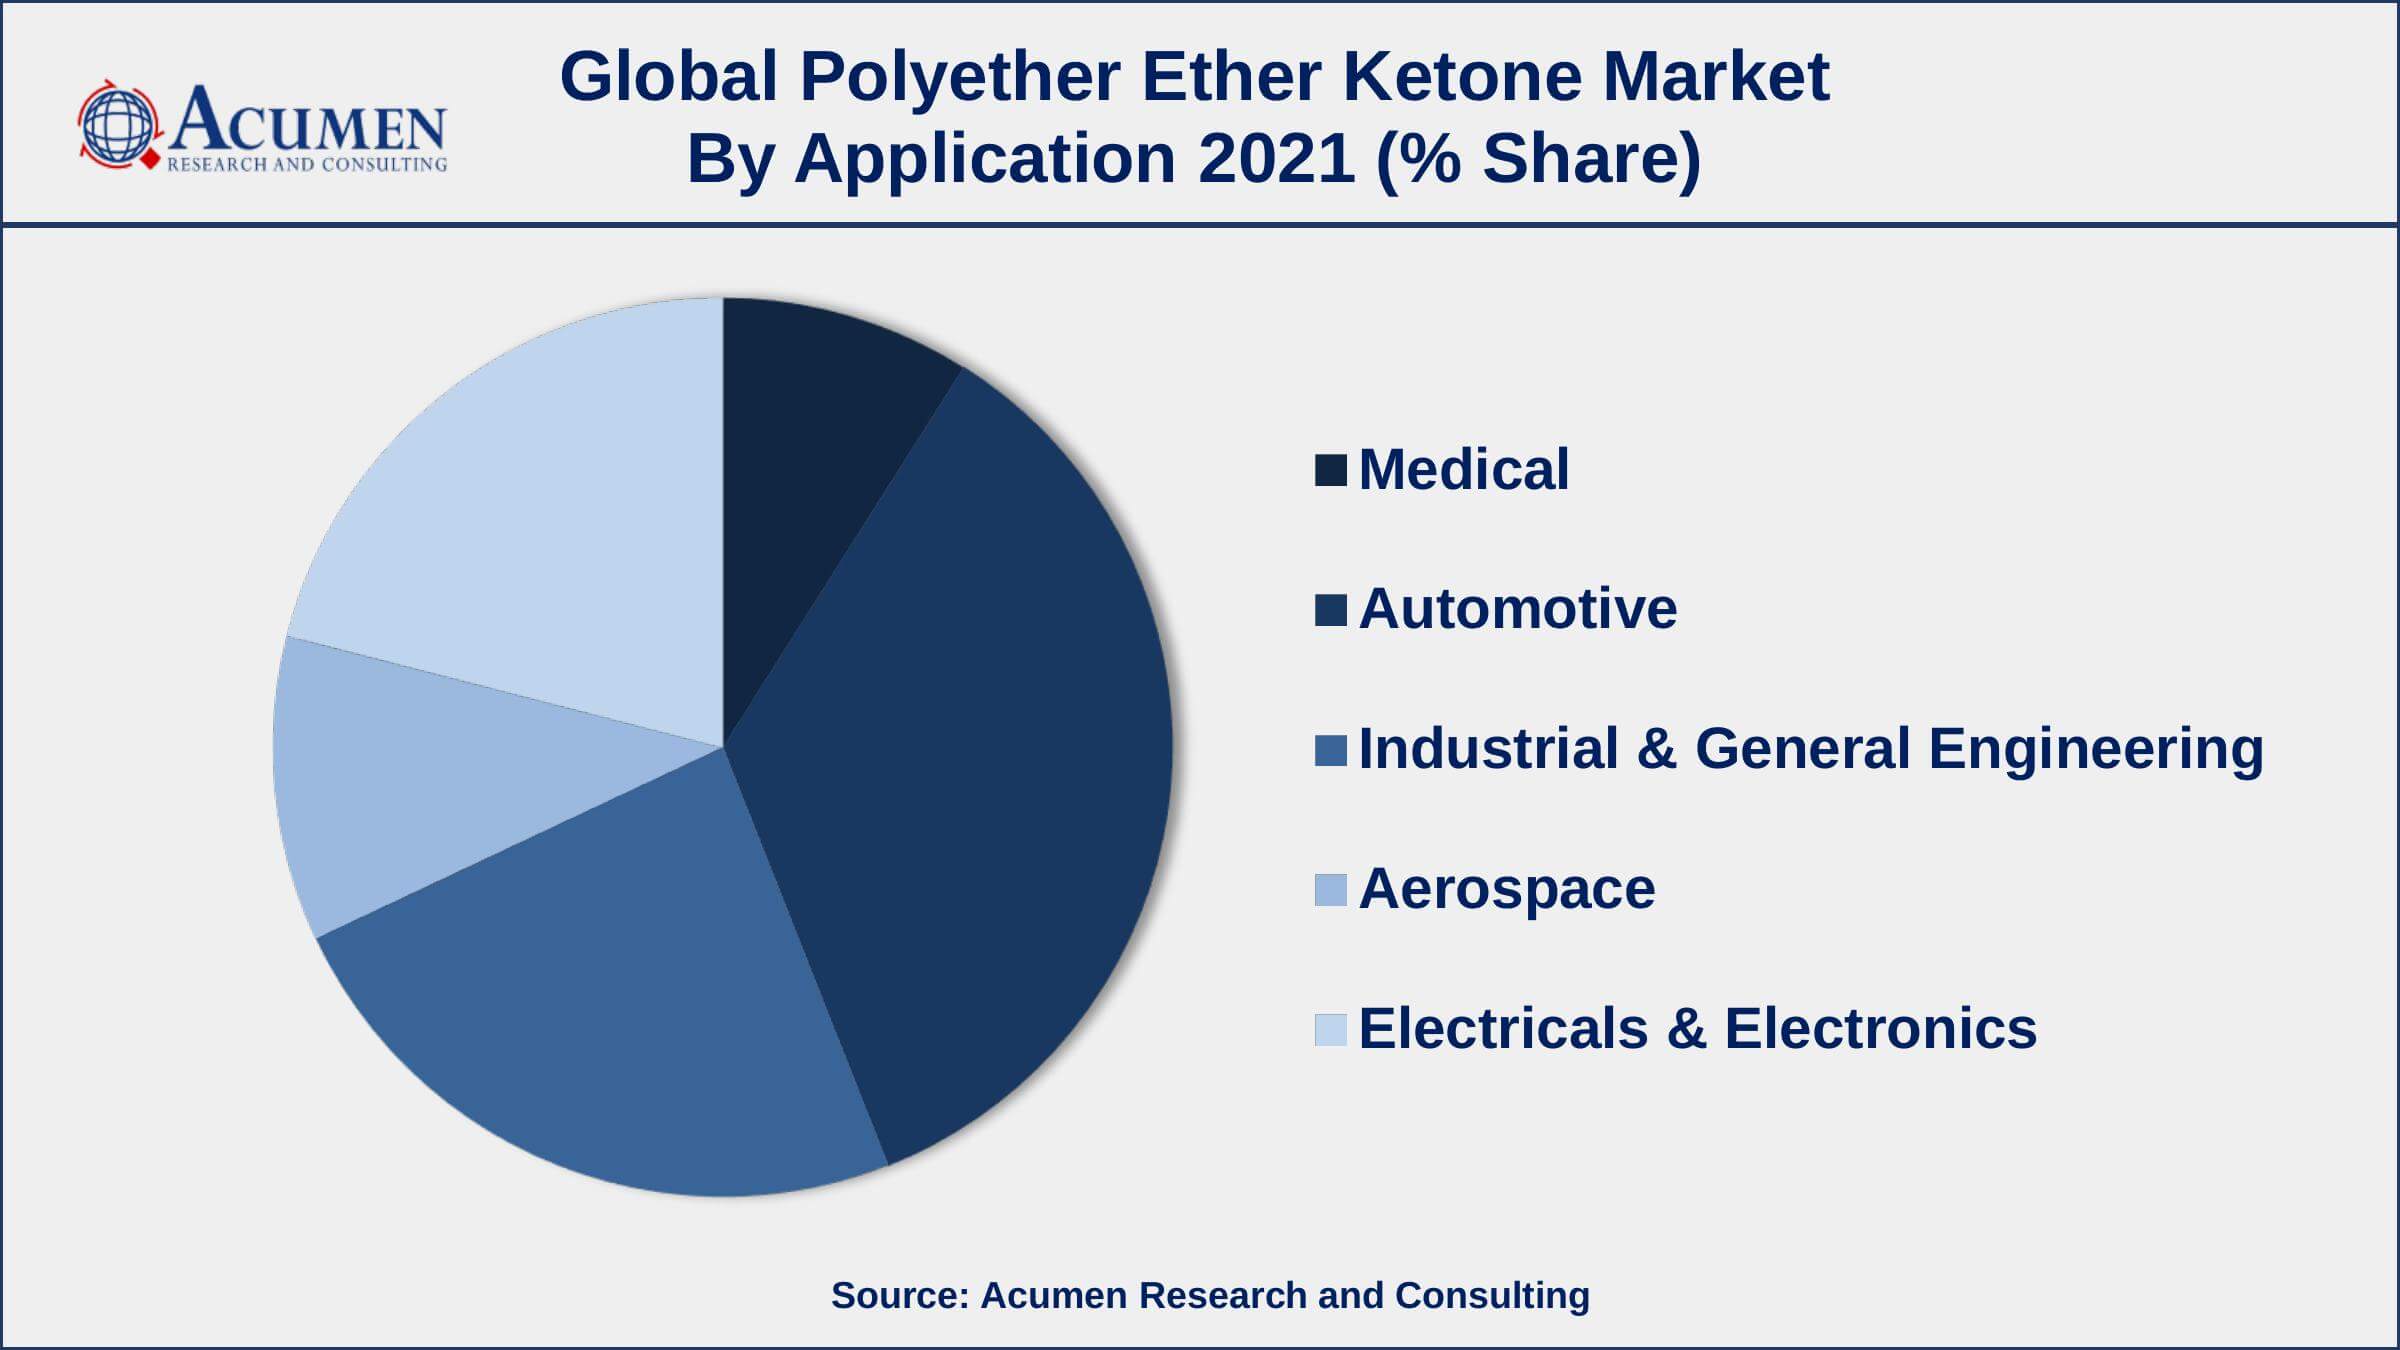 Among application, automotive segment engaged more than 35% of the total market share